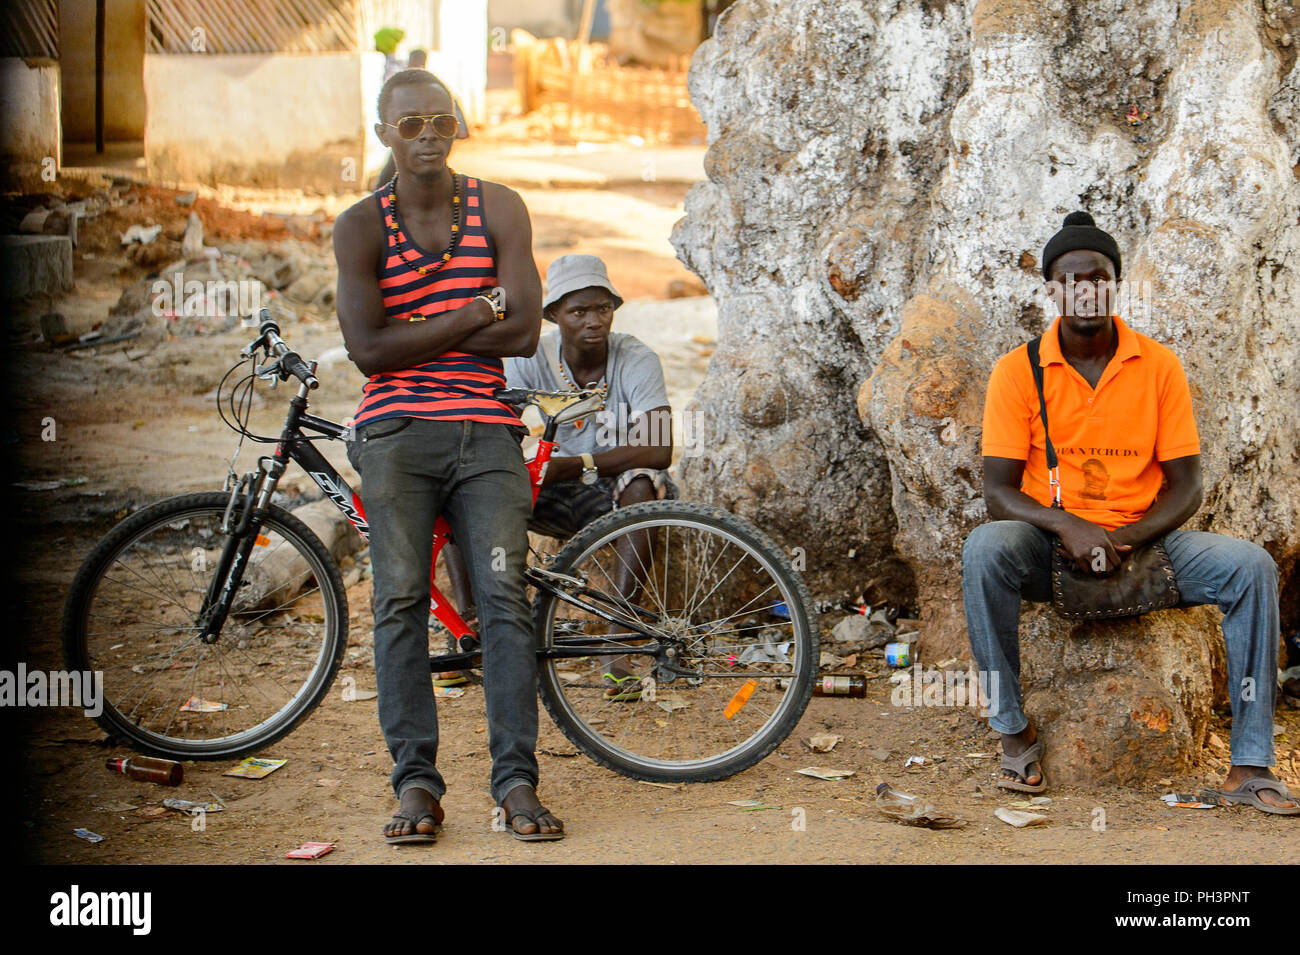 ROAD TO BISSAU, GUINEA B. - MAY 1, 2017: Unidentified local man leans on the bicycle in a village in Guinea Bissau. Still many people in the country l Stock Photo